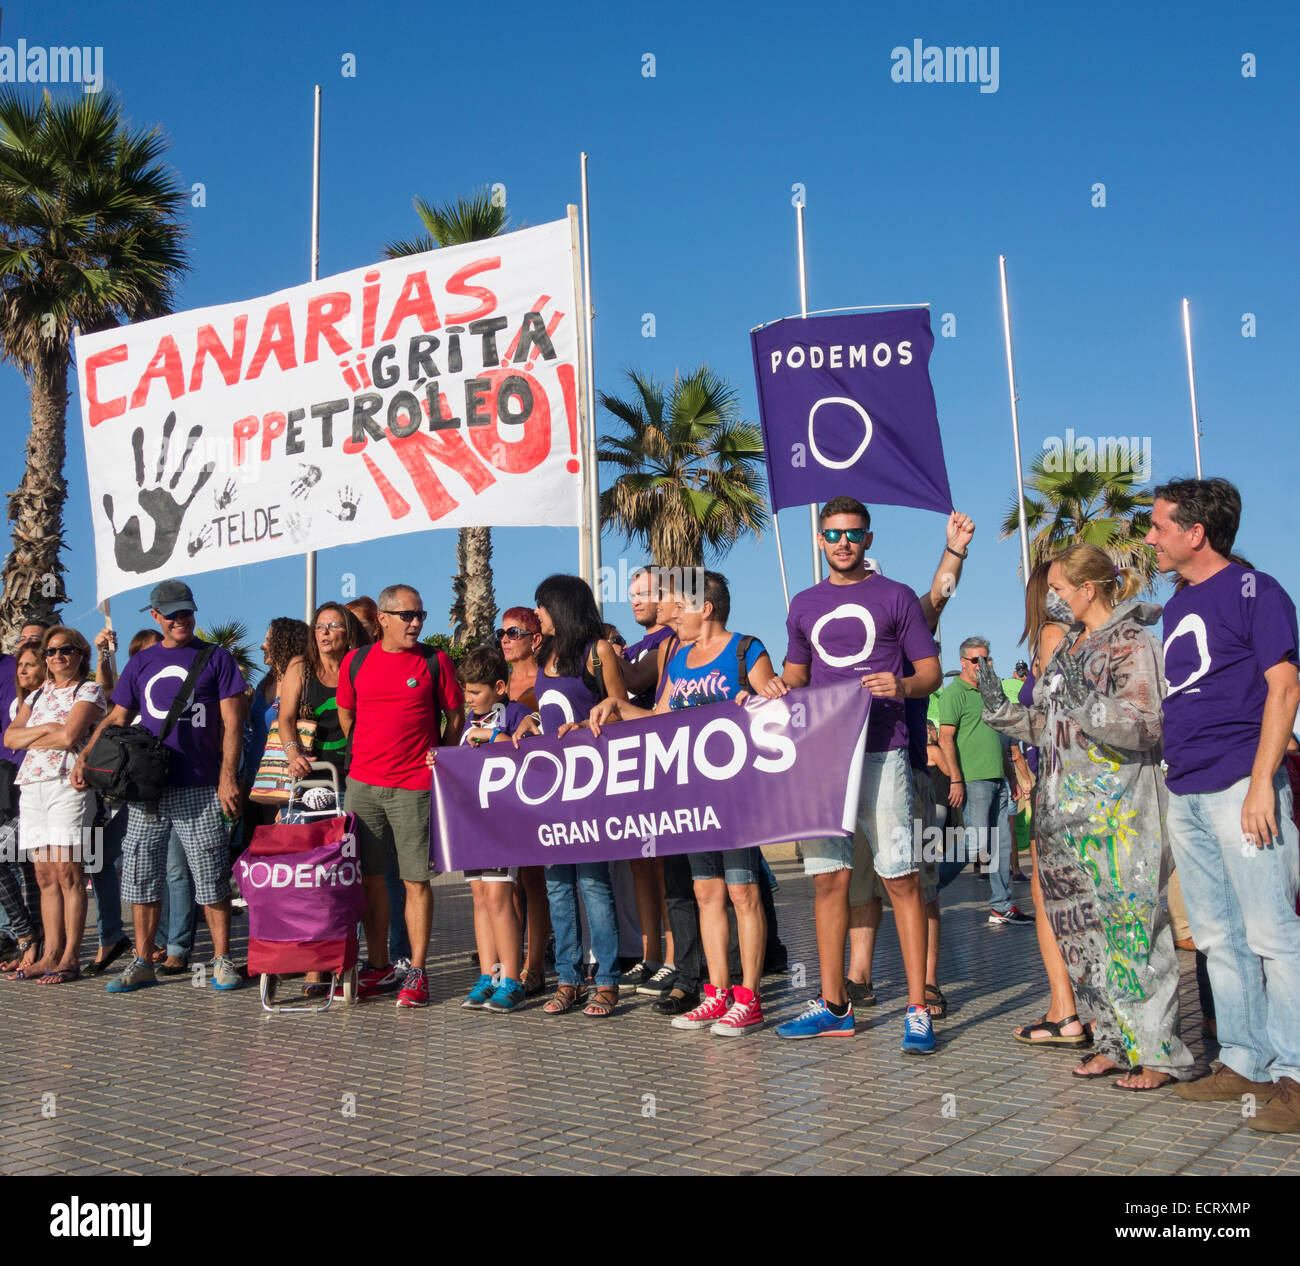 New Spanish political party, `Podemos` (we can), taking part in anti oil exploration march in Las Palmas, Gran Canaria, Spain Stock Photo